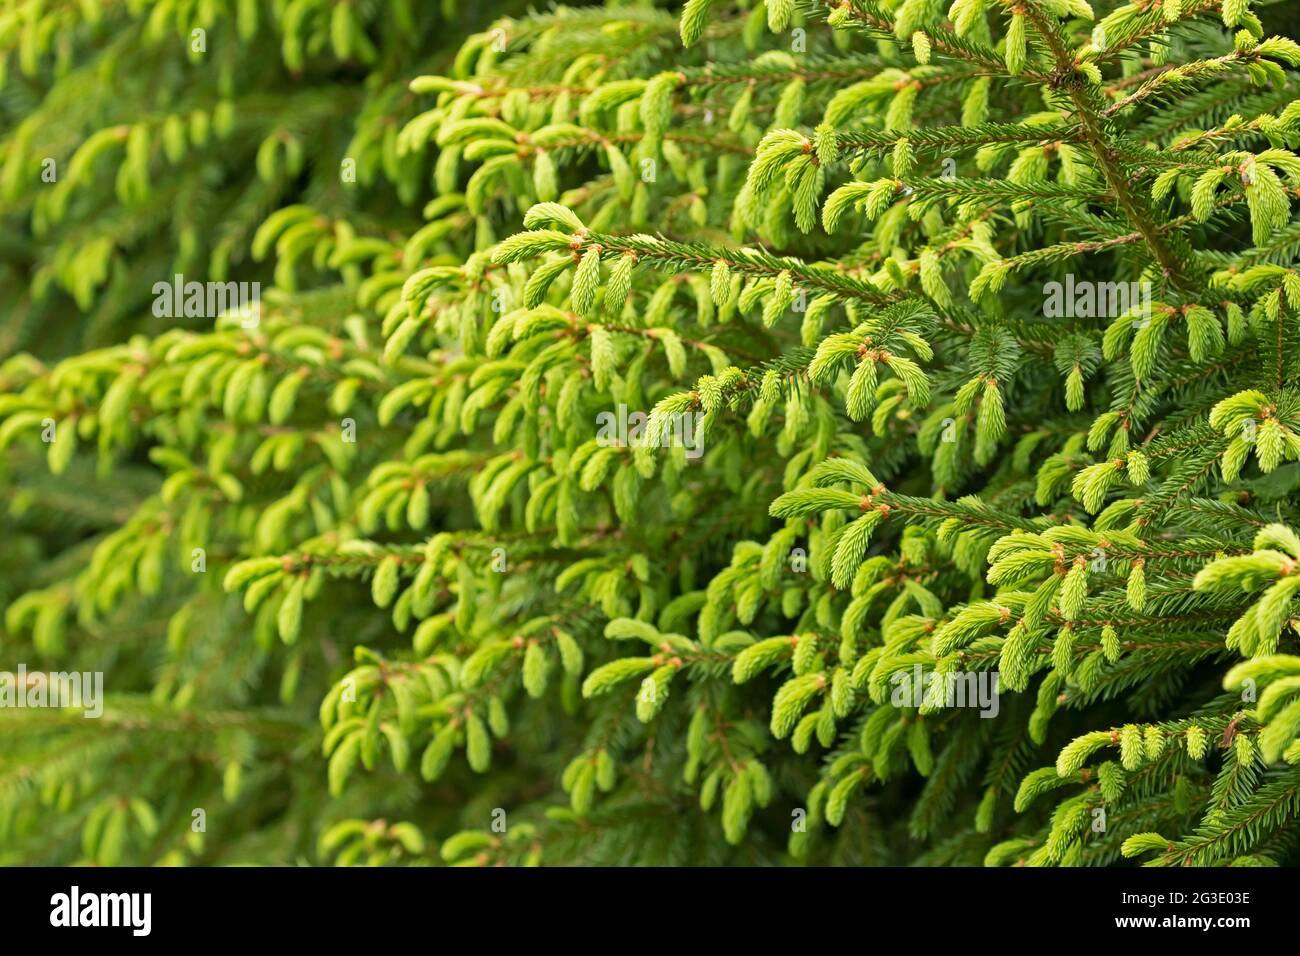 Close-up of Norway spruce (Picea abies) branches with young  shoots during spring, environmental protection and new life concept Stock Photo